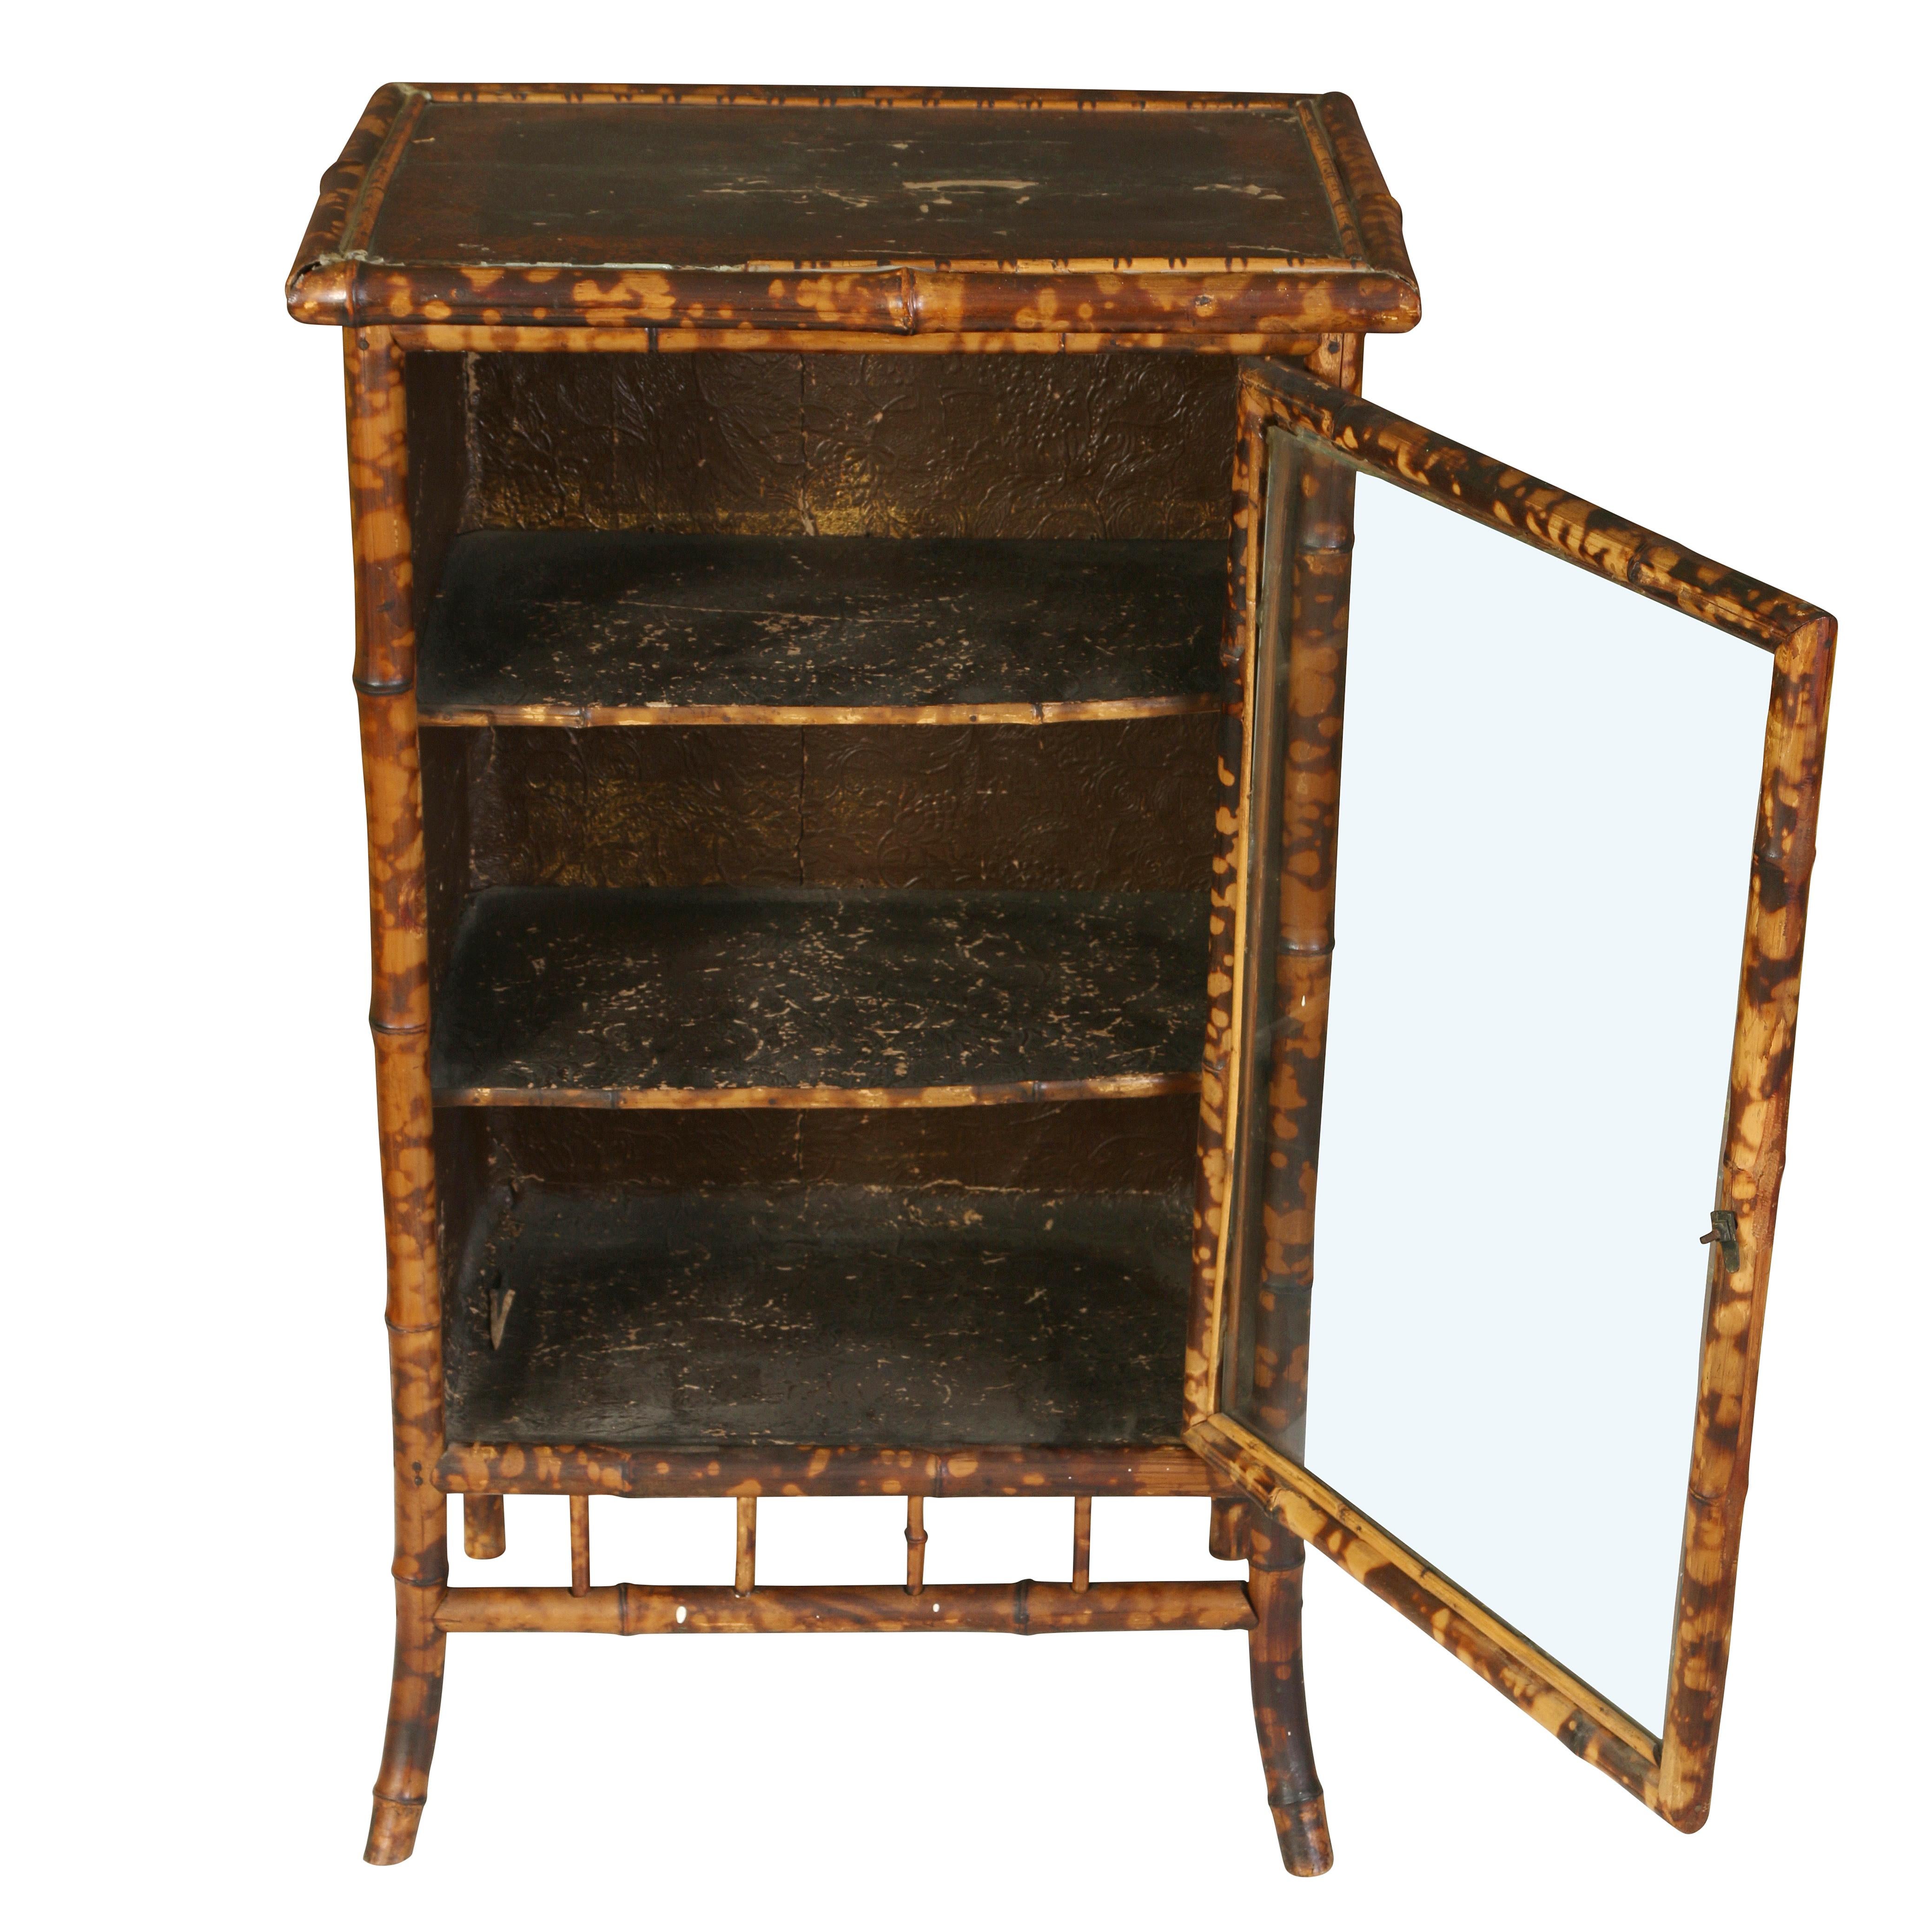 A handsome little bamboo cabinet in a faux tortoiseshell finish, with three shelves and a glass door.  The painted finish on the top and sides has developed a lovely time-worn patina, giving it great character and personality.  